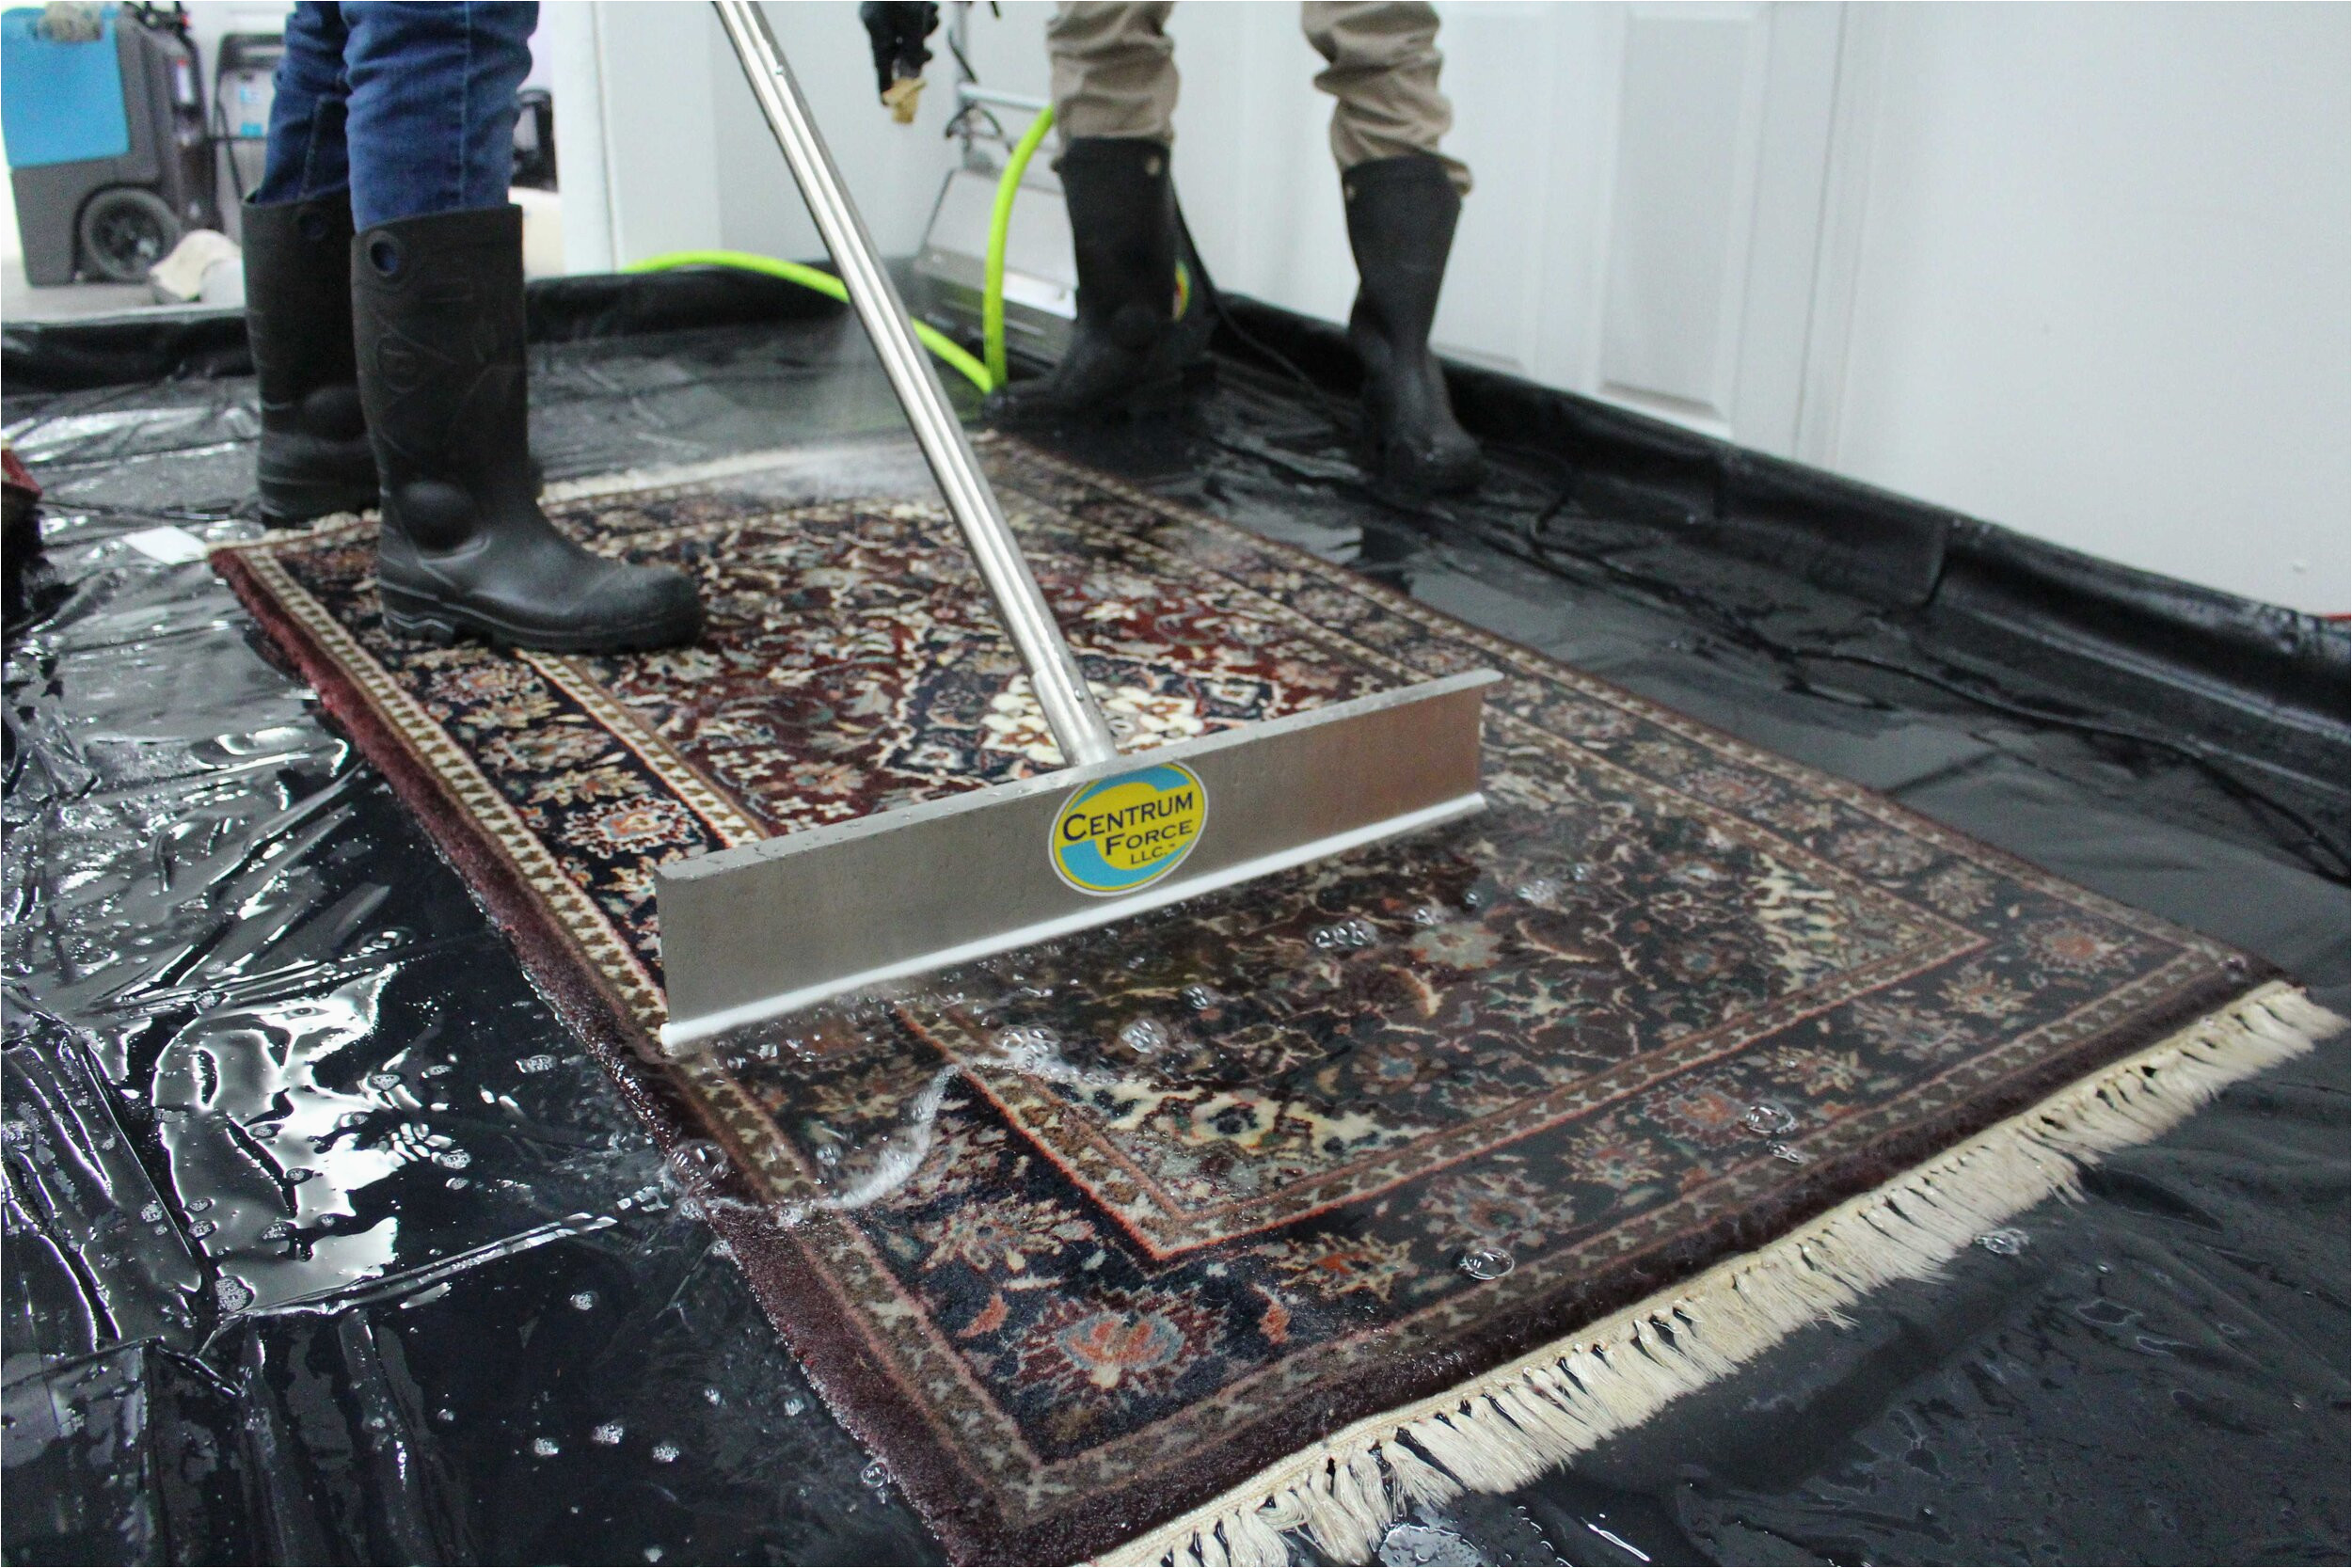 Area Rug Cleaning Service Pick Up area Rug Cleaning Drop Off and Pick Up Service â Sno-king Carpet …